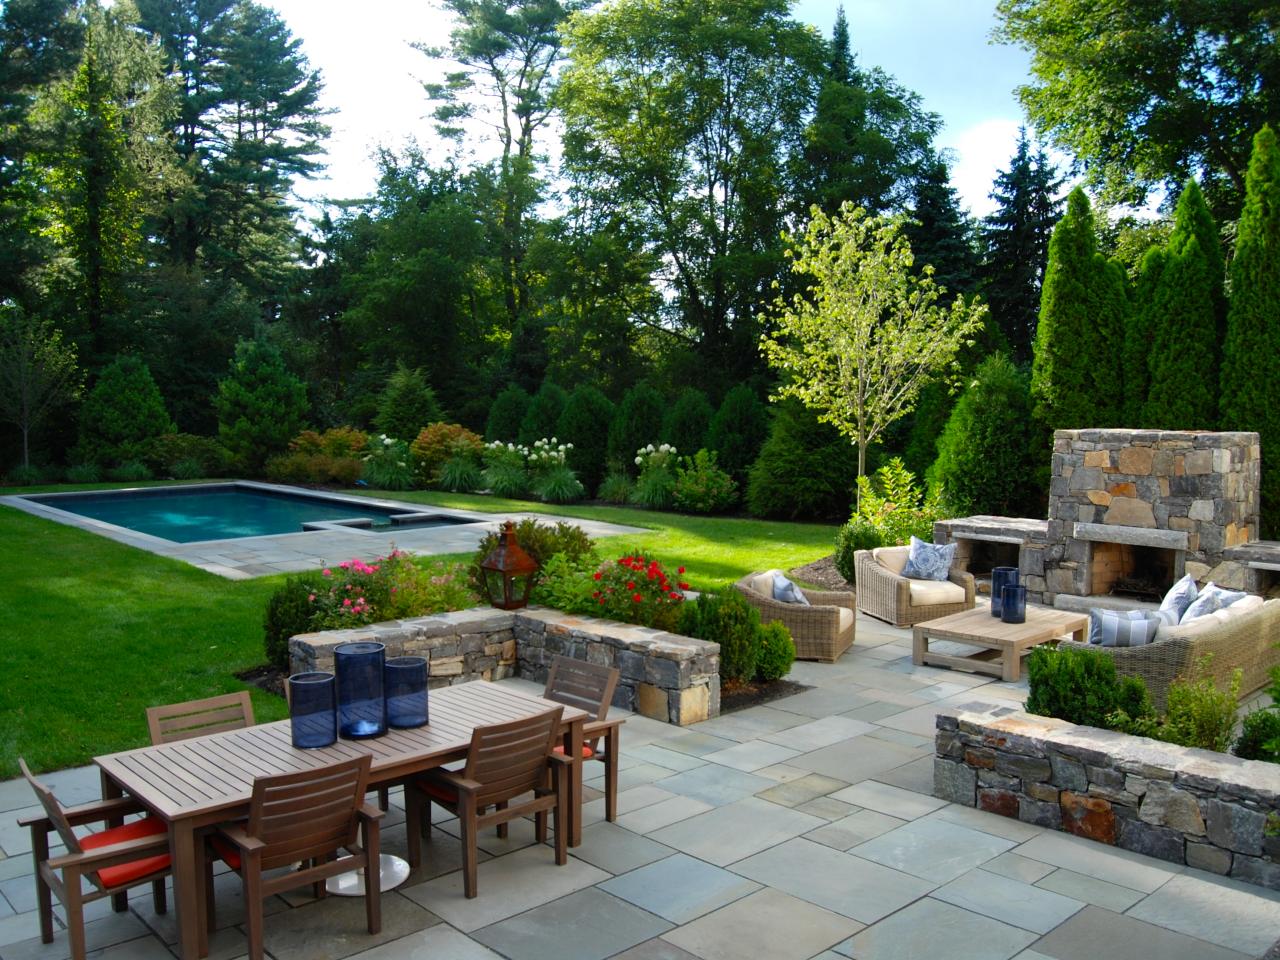 20 Wow-Worthy Hardscaping Ideas | Landscaping Ideas and ...